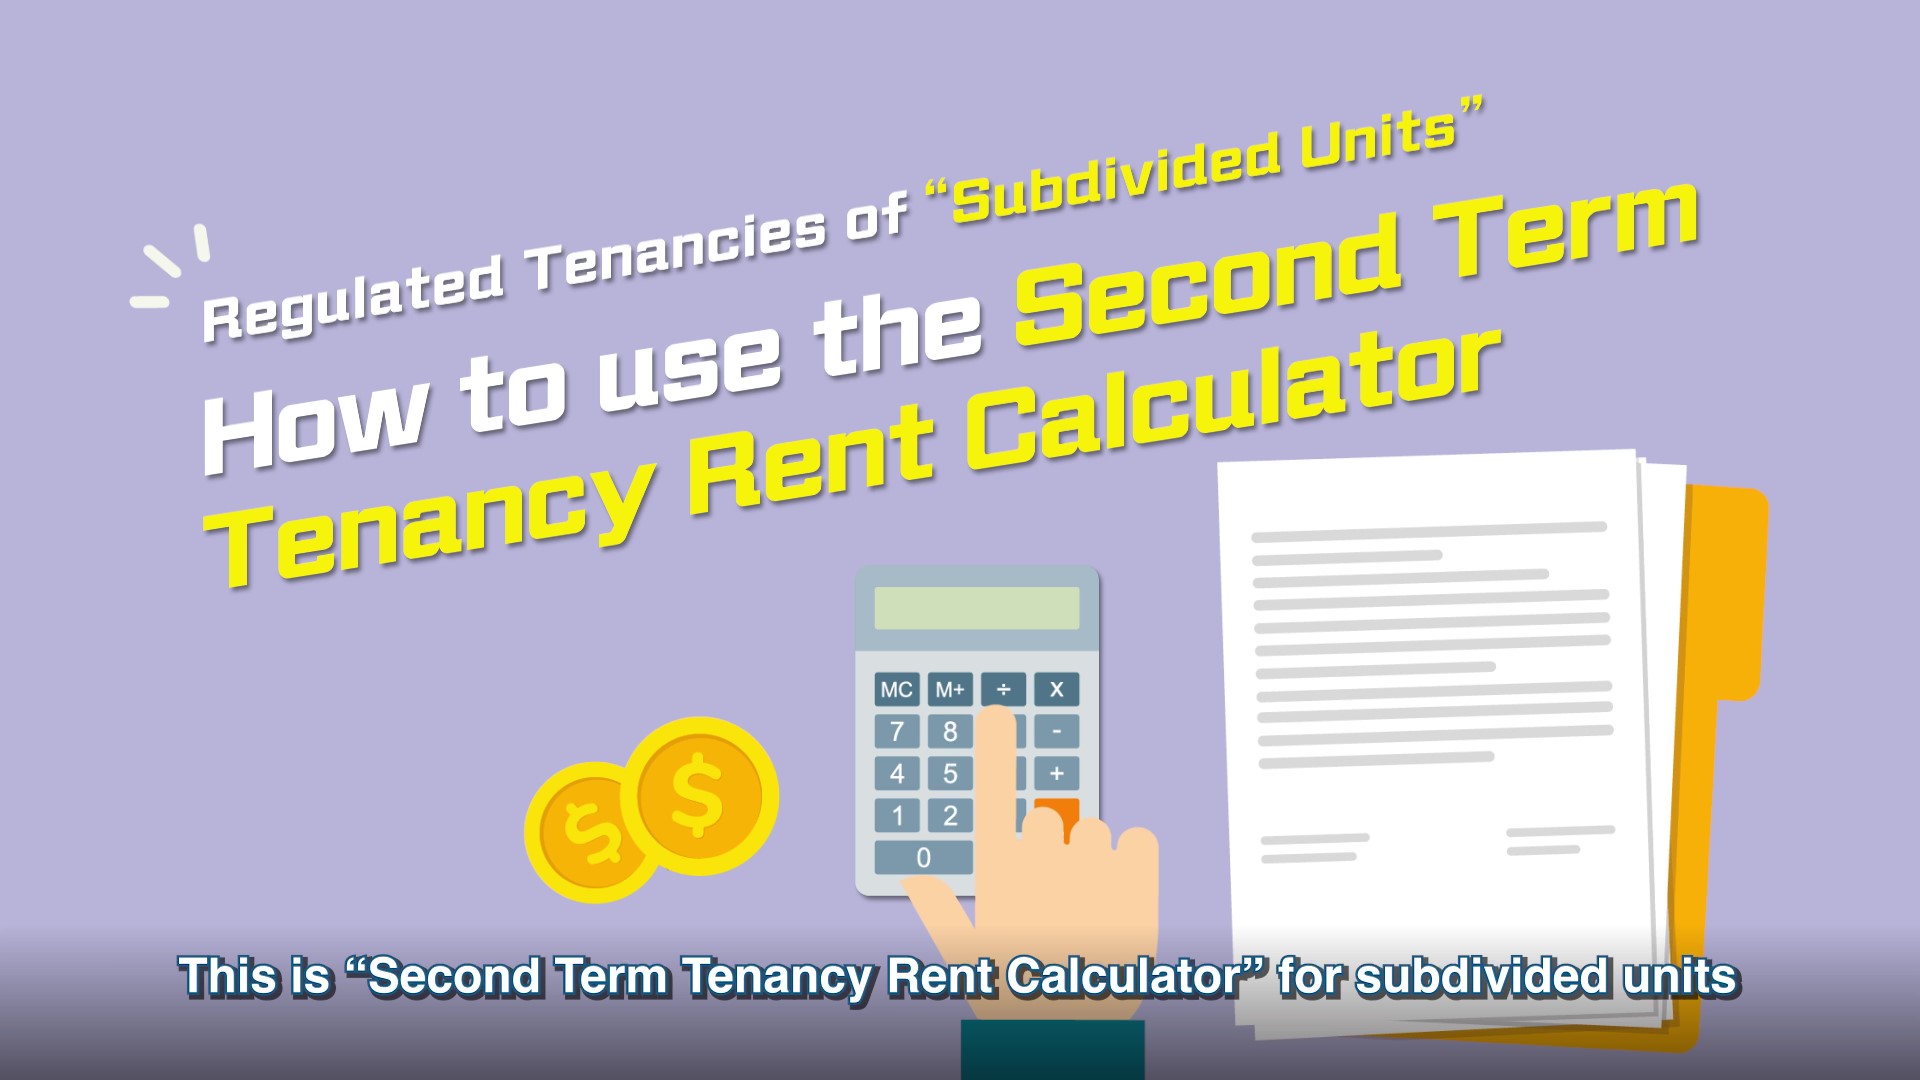 Tutorial video – Regulated Tenancies of Subdivided Units How to use the Second Term Tenancy Rent Calculator